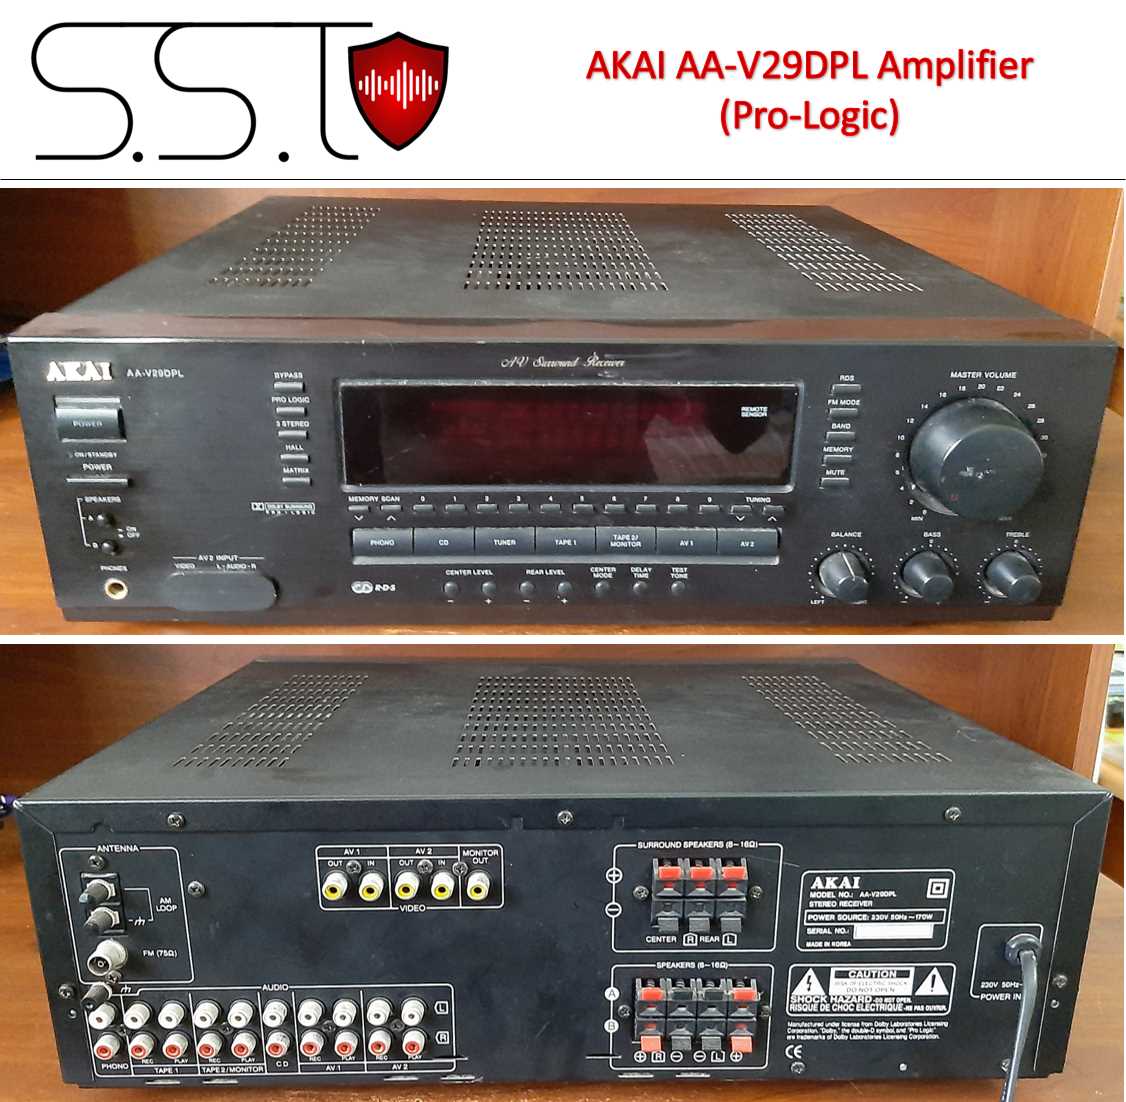 AKAI AA-V29DPL Stereo Receiver (Dolby Pro-Logic) For Sale